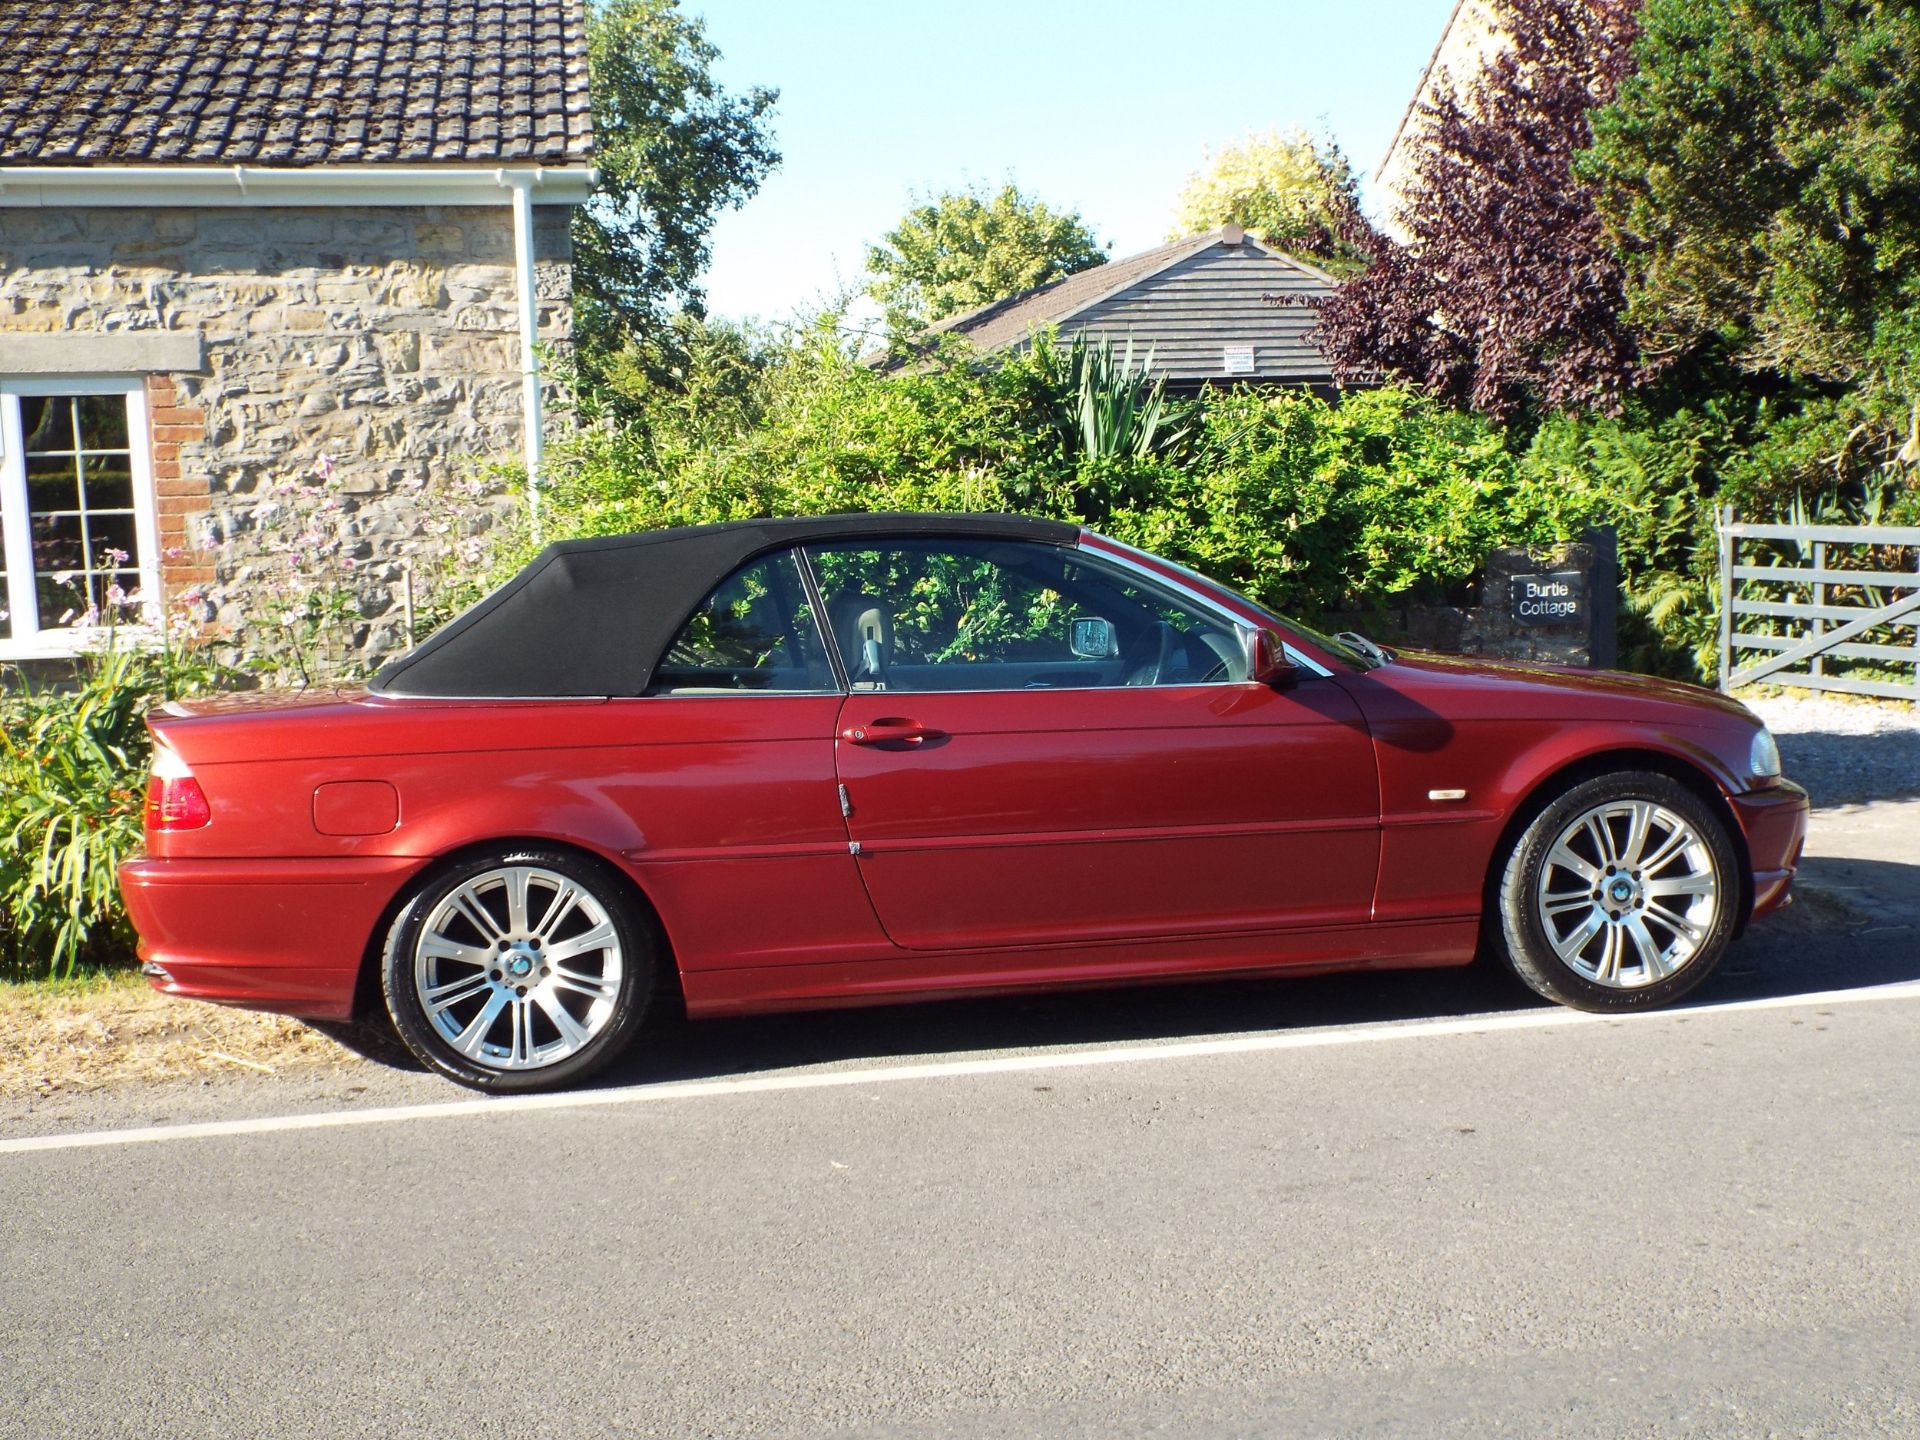 2000 BMW 330Ci Convertible Registration number W596 AVE Chassis number WBABS52060EH92204 Engine - Image 3 of 16